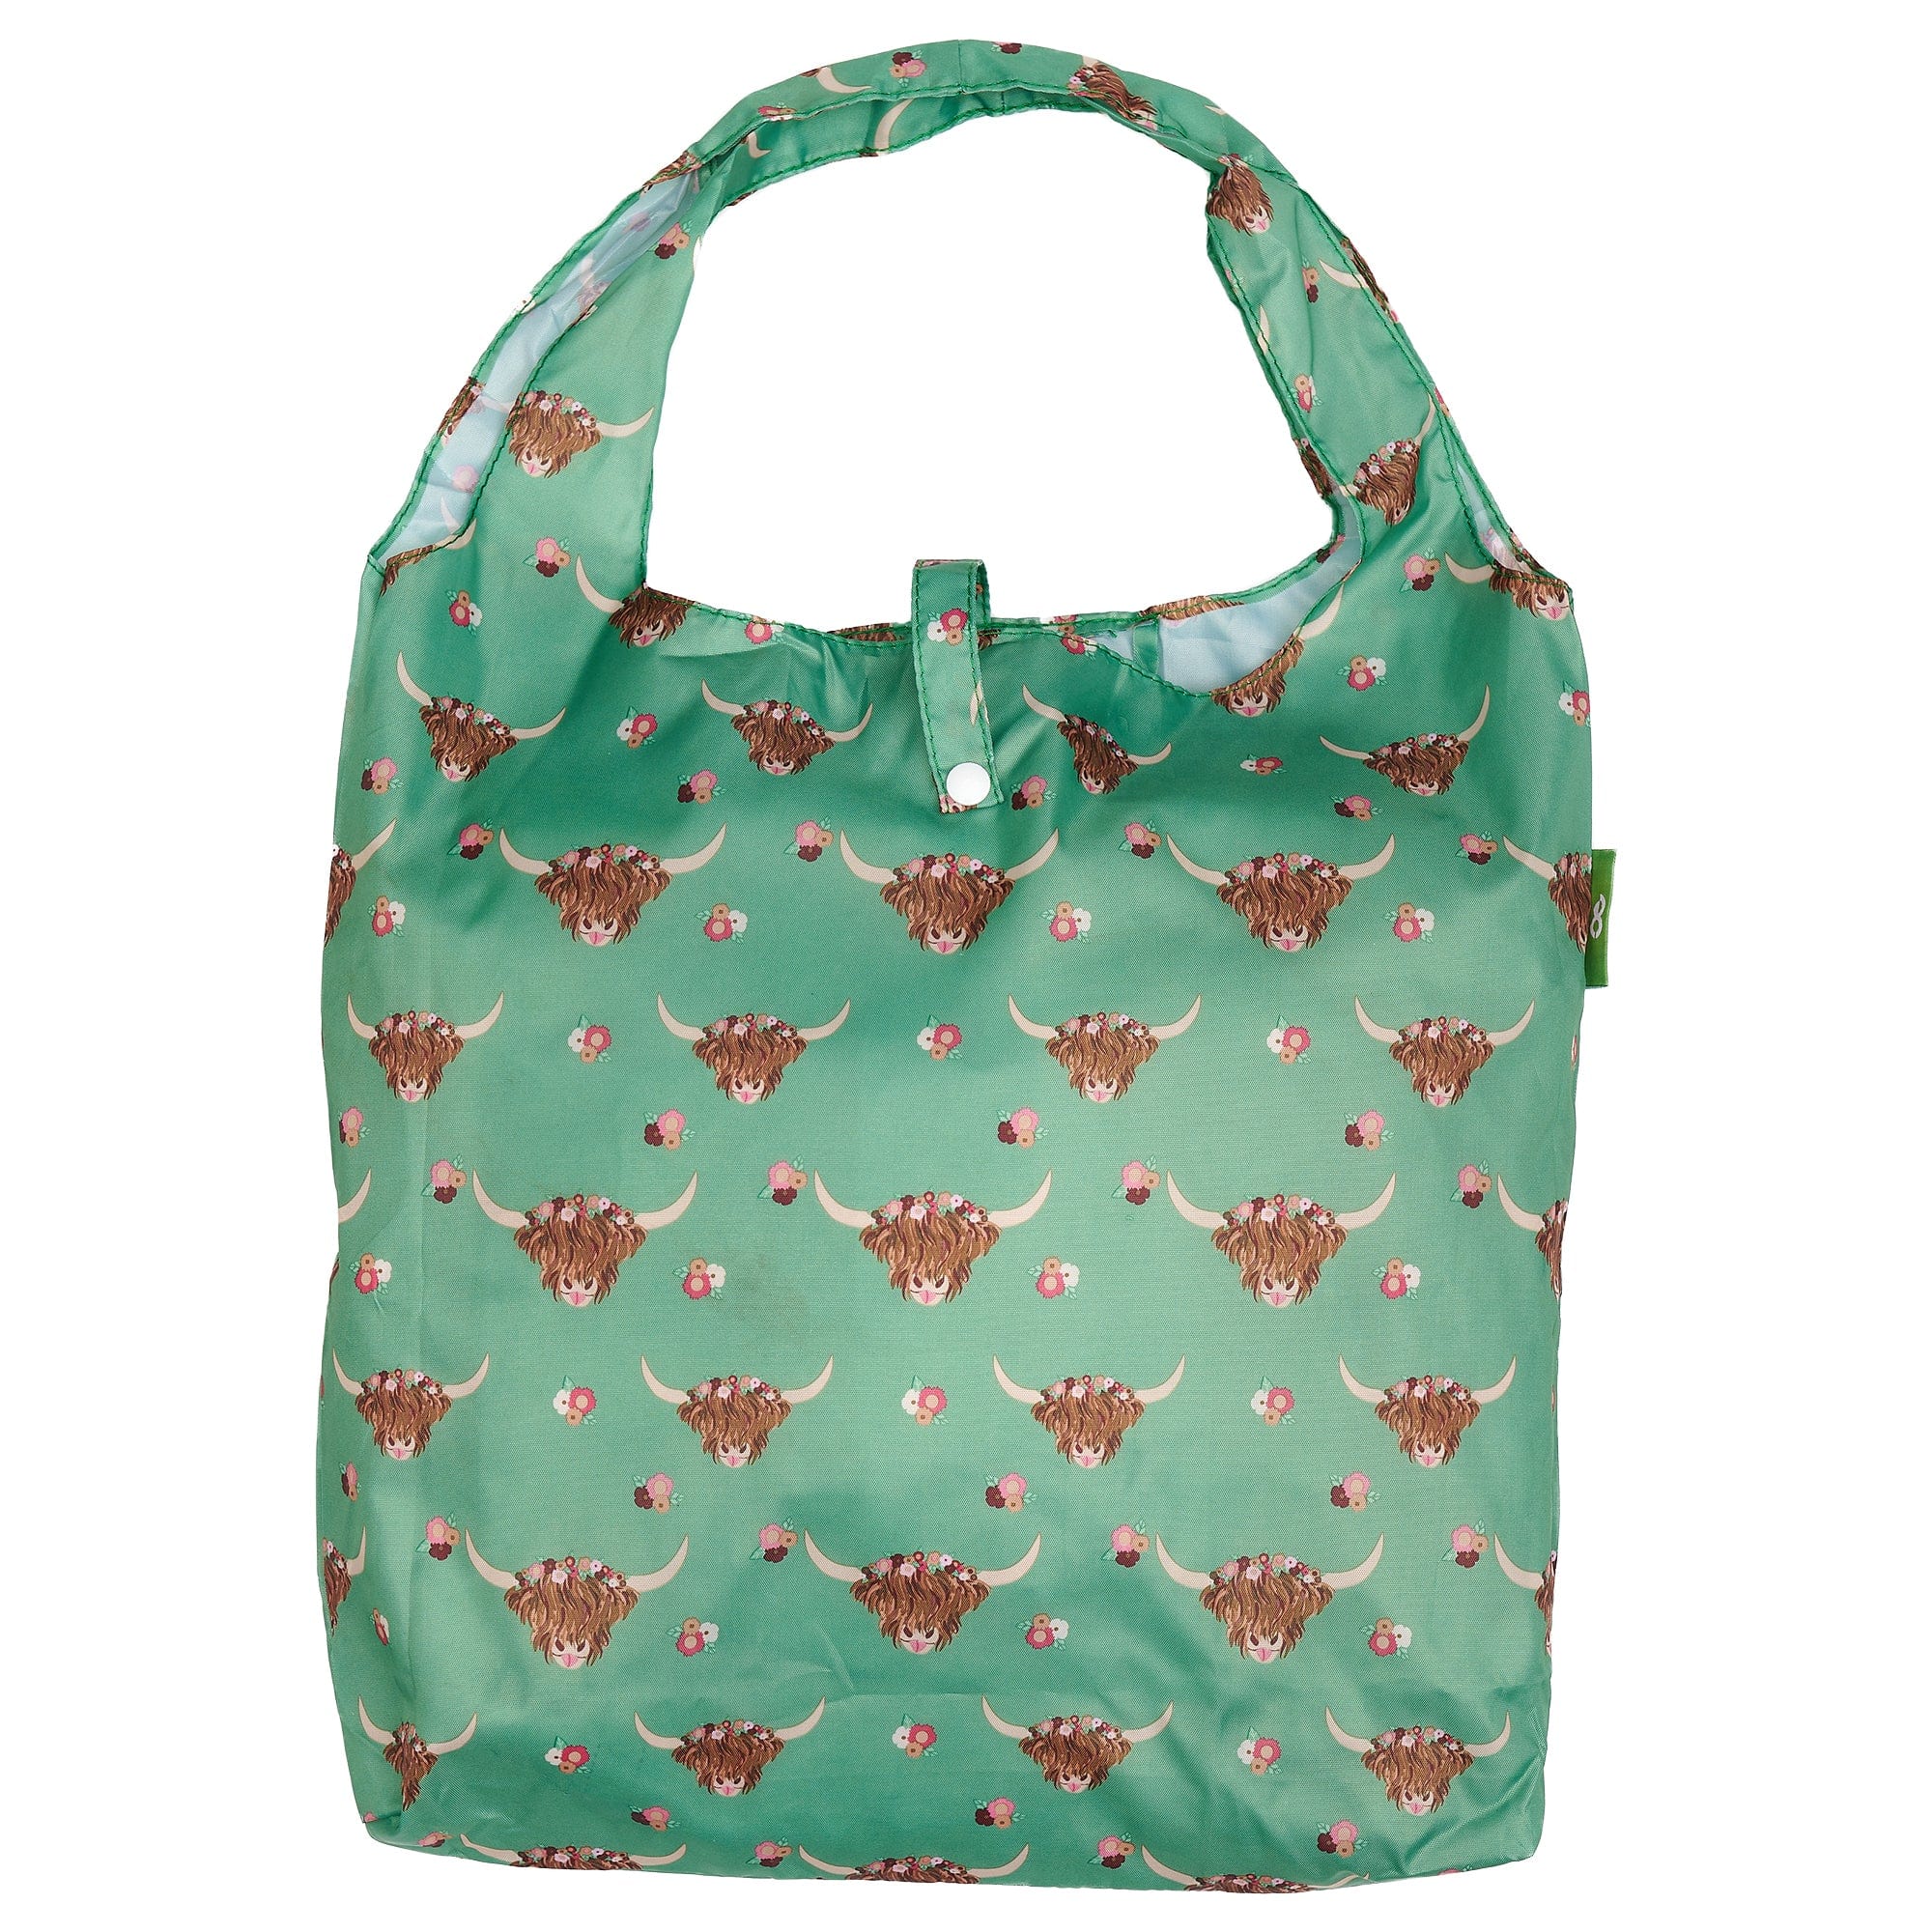 Eco Chic Eco Chic Lightweight Foldable Reusable Shopping Bag Floral Highland Cow